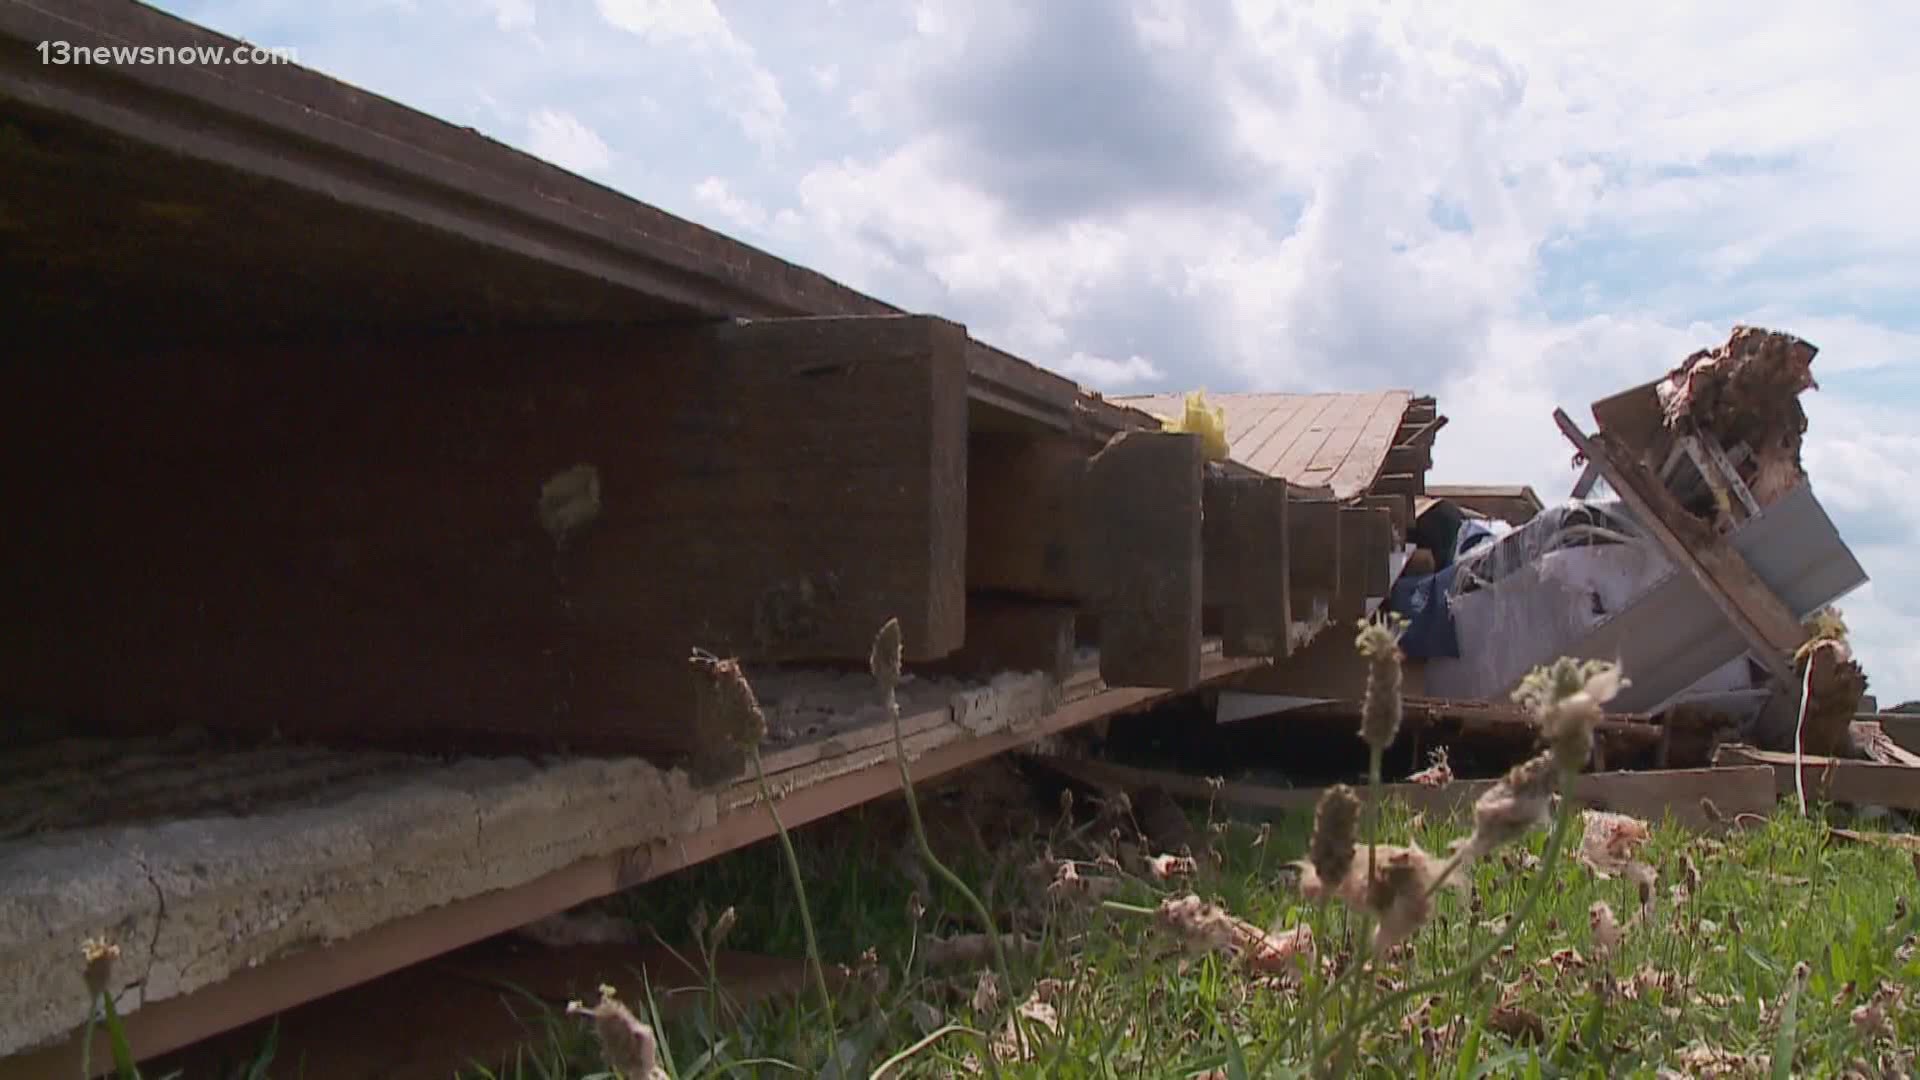 The National Weather Service confirms an EF1 tornado brought 100 mile-per-hour winds to Suffolk.